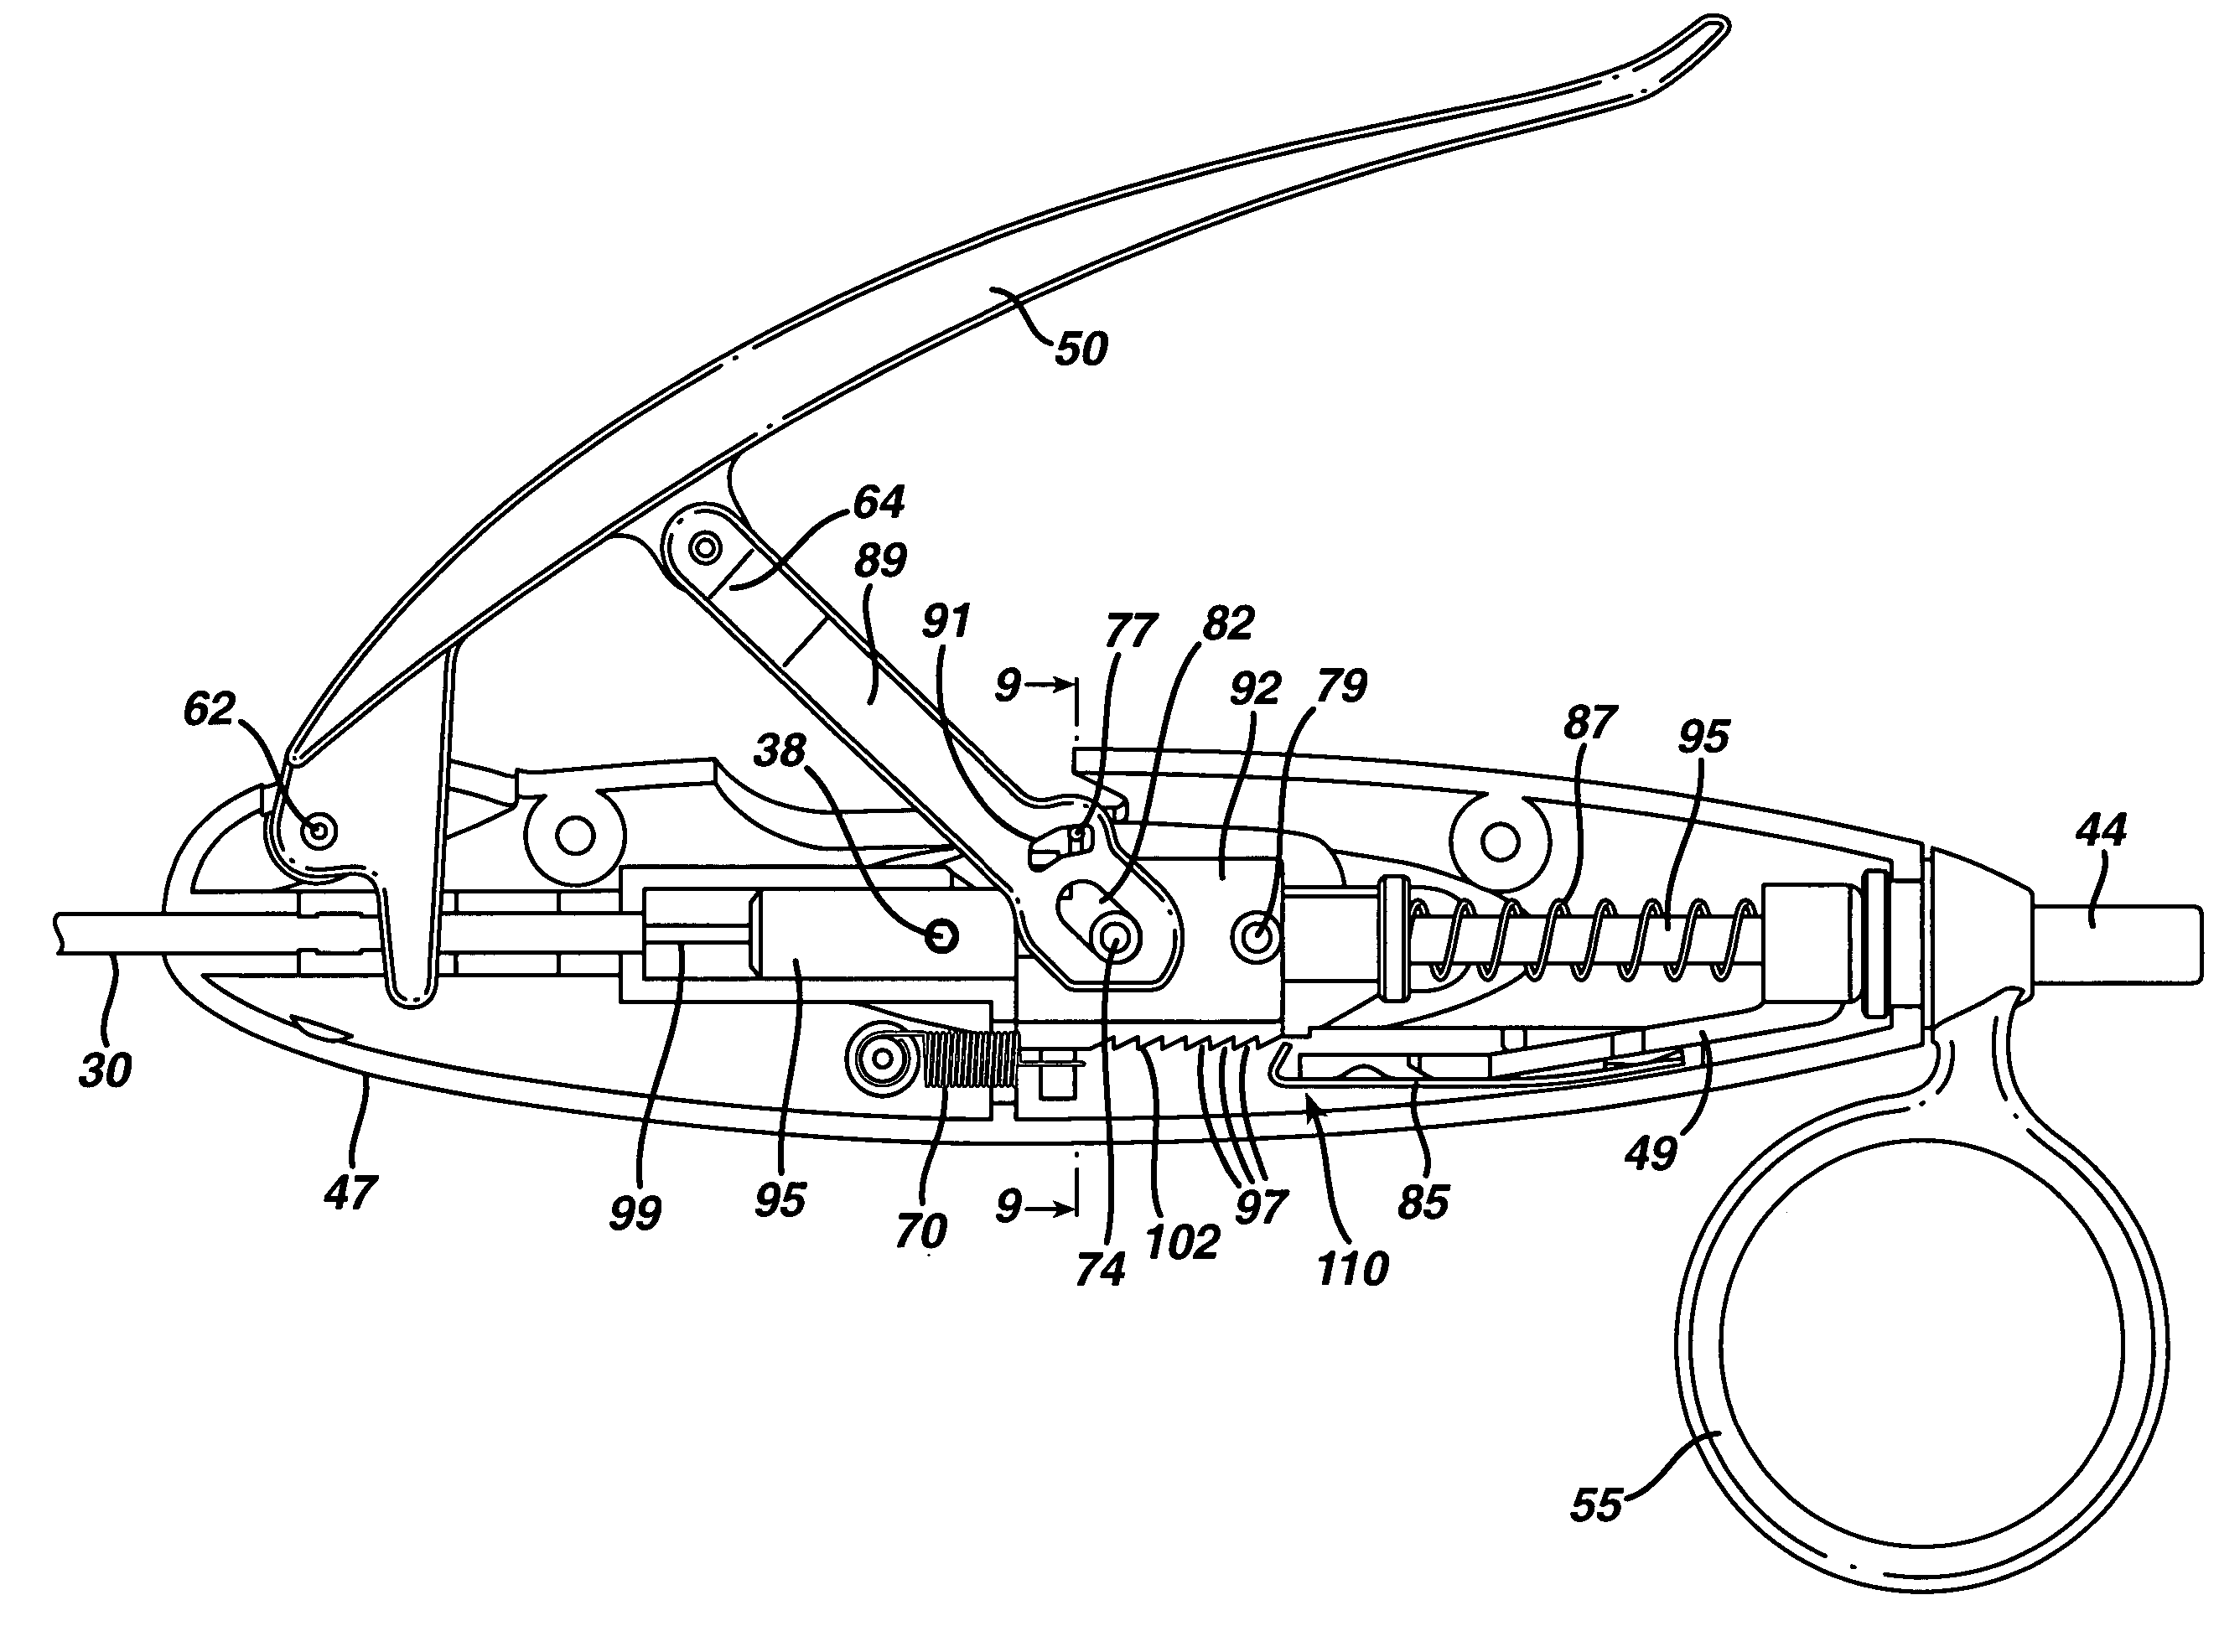 Handle for endoscopic device